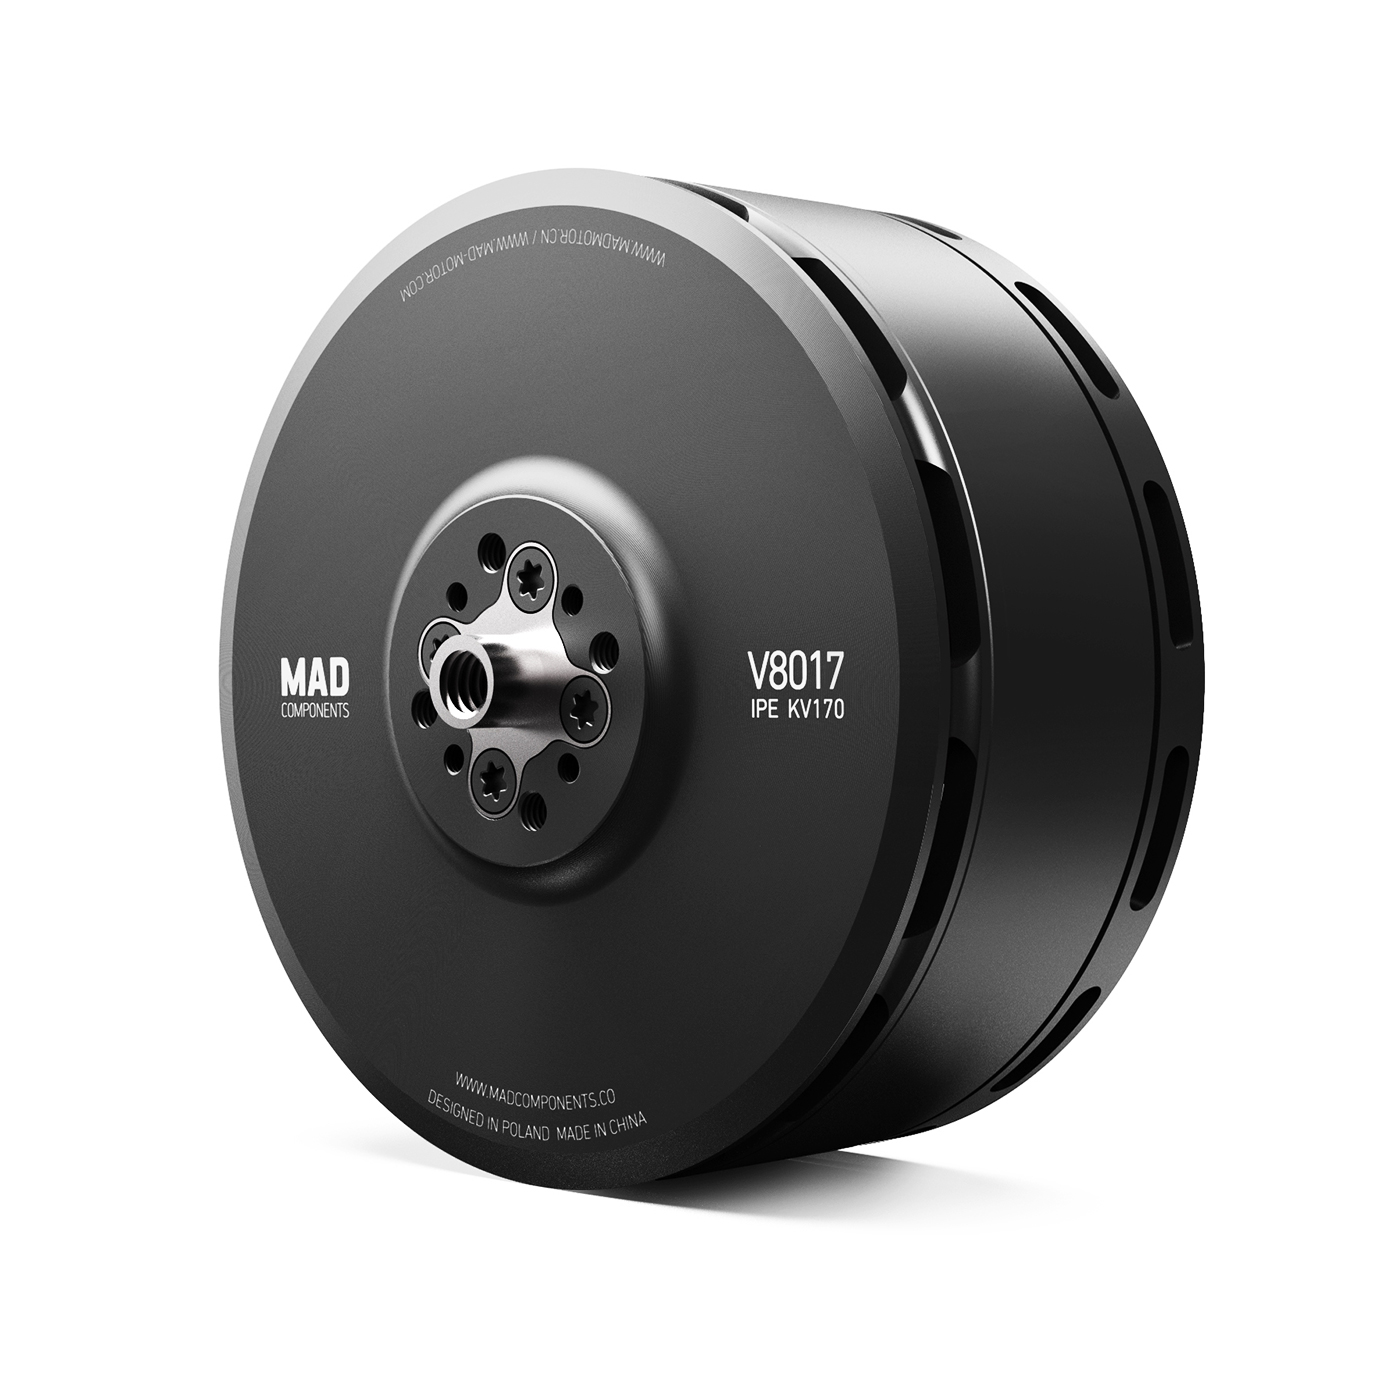 MAD V8017 IPE brushless motor for the classical  and big aerial photography, exploration, Archaeology, Remote sensing surveying, Mapping VTOL UAV drone aircraft